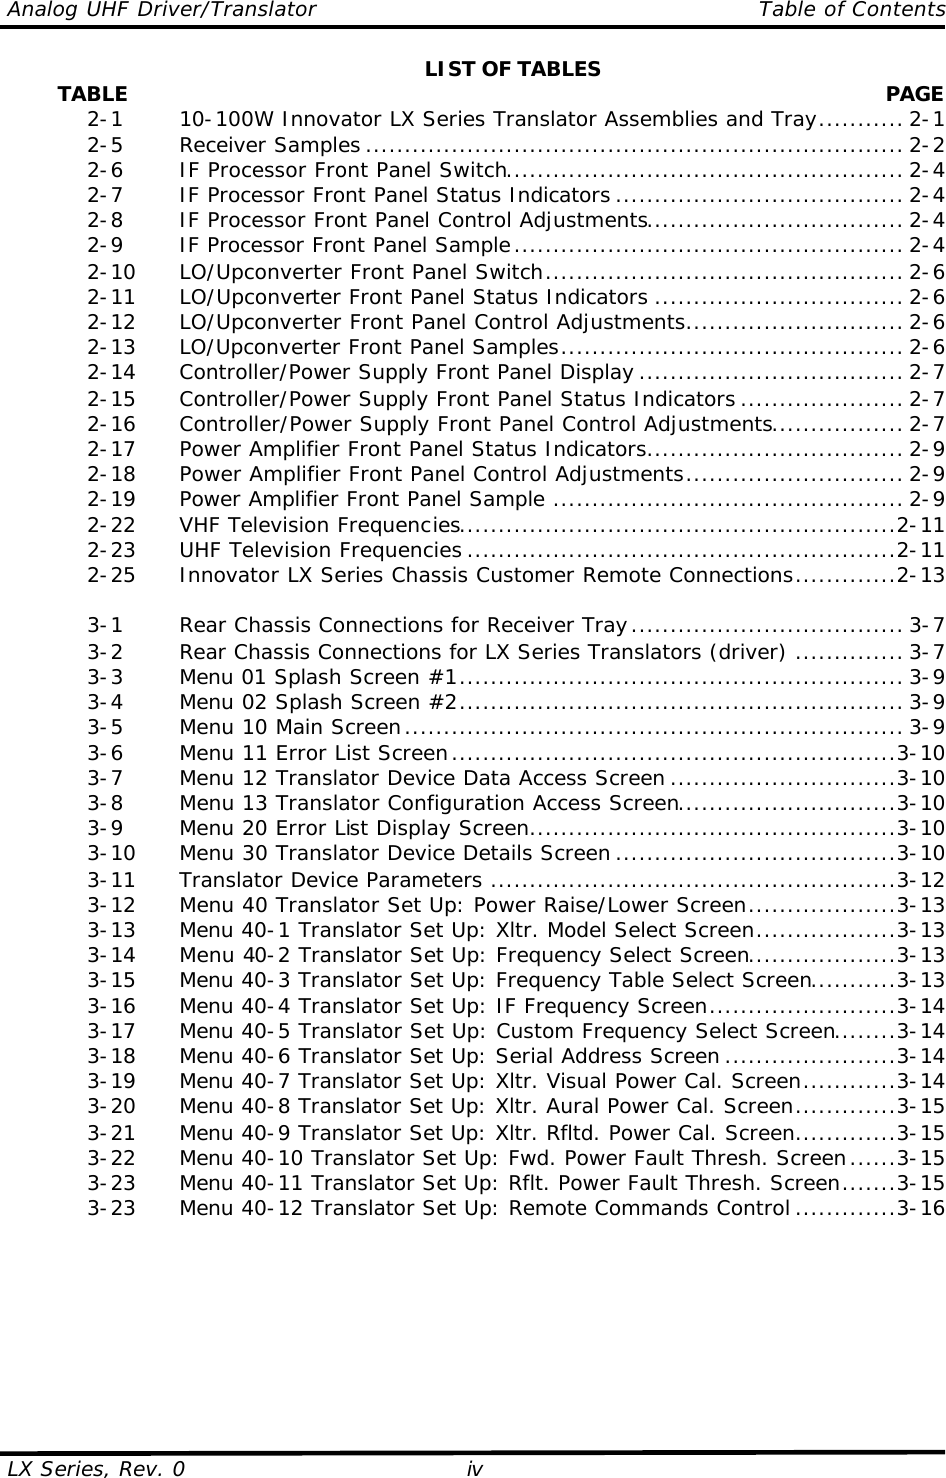 Analog UHF Driver/Translator    Table of Contents  LX Series, Rev. 0 iv LIST OF TABLES         TABLE  PAGE  2-1   10-100W Innovator LX Series Translator Assemblies and Tray........... 2-1  2-5   Receiver Samples ..................................................................... 2-2  2-6   IF Processor Front Panel Switch................................................... 2-4  2-7   IF Processor Front Panel Status Indicators ..................................... 2-4  2-8   IF Processor Front Panel Control Adjustments................................. 2-4  2-9   IF Processor Front Panel Sample.................................................. 2-4  2-10 LO/Upconverter Front Panel Switch.............................................. 2-6  2-11 LO/Upconverter Front Panel Status Indicators ................................ 2-6  2-12 LO/Upconverter Front Panel Control Adjustments............................ 2-6  2-13 LO/Upconverter Front Panel Samples............................................ 2-6  2-14 Controller/Power Supply Front Panel Display .................................. 2-7  2-15 Controller/Power Supply Front Panel Status Indicators ..................... 2-7  2-16 Controller/Power Supply Front Panel Control Adjustments................. 2-7  2-17 Power Amplifier Front Panel Status Indicators................................. 2-9  2-18 Power Amplifier Front Panel Control Adjustments............................ 2-9  2-19 Power Amplifier Front Panel Sample ............................................. 2-9  2-22 VHF Television Frequencies........................................................2-11  2-23 UHF Television Frequencies .......................................................2-11  2-25 Innovator LX Series Chassis Customer Remote Connections.............2-13     3-1   Rear Chassis Connections for Receiver Tray................................... 3-7  3-2   Rear Chassis Connections for LX Series Translators (driver) .............. 3-7  3-3   Menu 01 Splash Screen #1......................................................... 3-9  3-4   Menu 02 Splash Screen #2......................................................... 3-9  3-5   Menu 10 Main Screen................................................................ 3-9  3-6   Menu 11 Error List Screen.........................................................3-10  3-7   Menu 12 Translator Device Data Access Screen .............................3-10  3-8   Menu 13 Translator Configuration Access Screen............................3-10  3-9   Menu 20 Error List Display Screen...............................................3-10  3-10 Menu 30 Translator Device Details Screen ....................................3-10  3-11 Translator Device Parameters ....................................................3-12  3-12 Menu 40 Translator Set Up: Power Raise/Lower Screen...................3-13  3-13 Menu 40-1 Translator Set Up: Xltr. Model Select Screen..................3-13  3-14 Menu 40-2 Translator Set Up: Frequency Select Screen...................3-13  3-15 Menu 40-3 Translator Set Up: Frequency Table Select Screen...........3-13  3-16 Menu 40-4 Translator Set Up: IF Frequency Screen........................3-14  3-17 Menu 40-5 Translator Set Up: Custom Frequency Select Screen........3-14  3-18 Menu 40-6 Translator Set Up: Serial Address Screen ......................3-14  3-19 Menu 40-7 Translator Set Up: Xltr. Visual Power Cal. Screen............3-14  3-20 Menu 40-8 Translator Set Up: Xltr. Aural Power Cal. Screen.............3-15  3-21 Menu 40-9 Translator Set Up: Xltr. Rfltd. Power Cal. Screen.............3-15  3-22 Menu 40-10 Translator Set Up: Fwd. Power Fault Thresh. Screen......3-15  3-23 Menu 40-11 Translator Set Up: Rflt. Power Fault Thresh. Screen.......3-15  3-23 Menu 40-12 Translator Set Up: Remote Commands Control .............3-16         